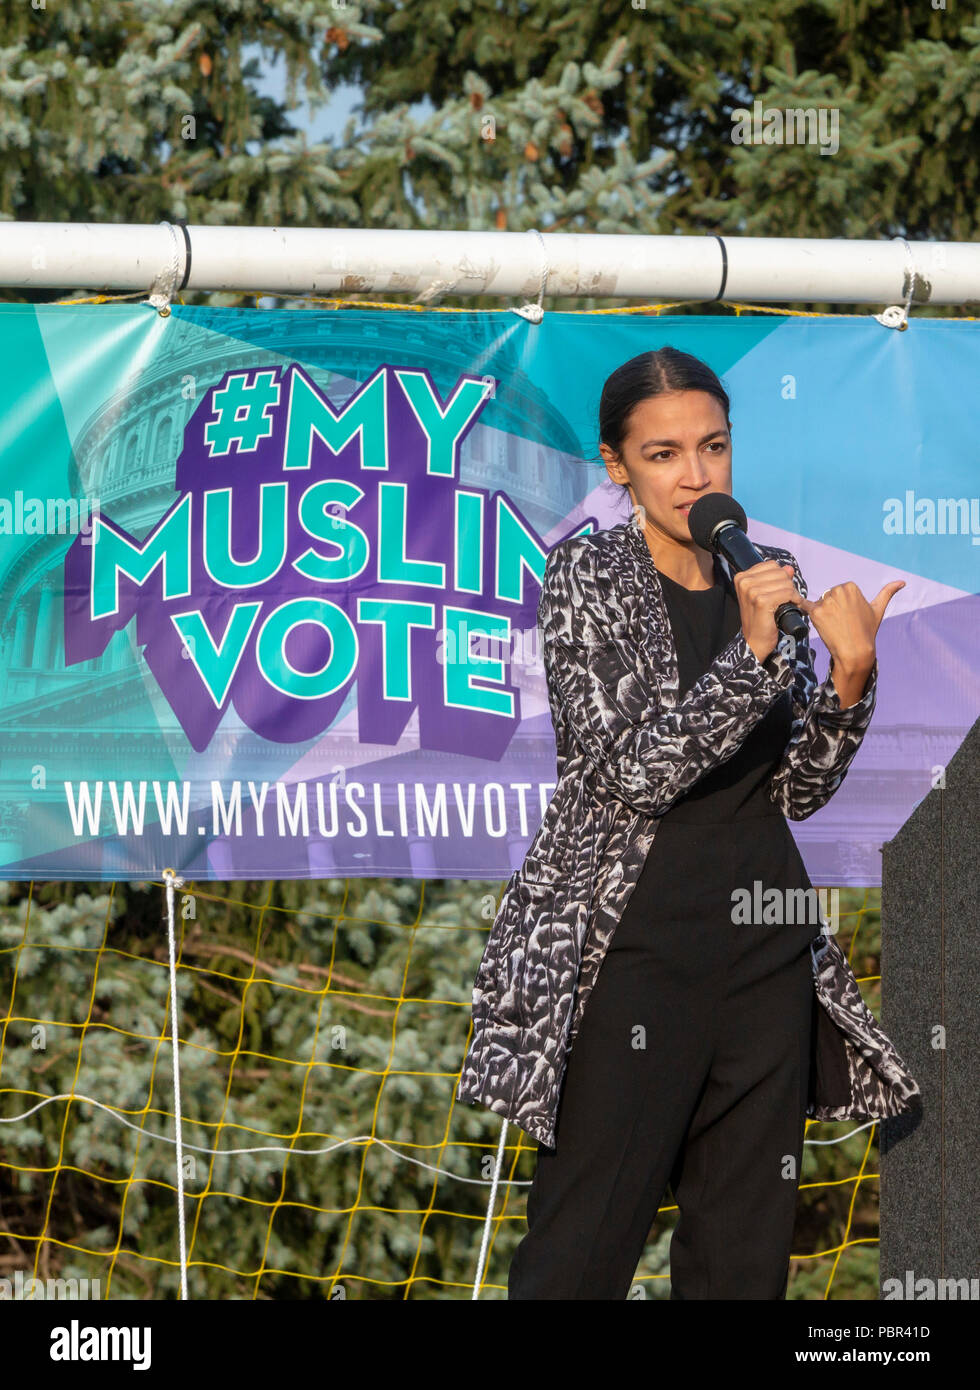 Dearborn, Michigan USA - 29 July 2018 - Alexandria Ocasio-Cortez speaks at a Muslim Get Out the Vote rally, sponsored by several Muslim community organizations. Ocasio-Cortez is the Democratic candidate for Congress in New York's 14th District, having upset incumbent Joe Crowley. Credit: Jim West/Alamy Live News Stock Photo